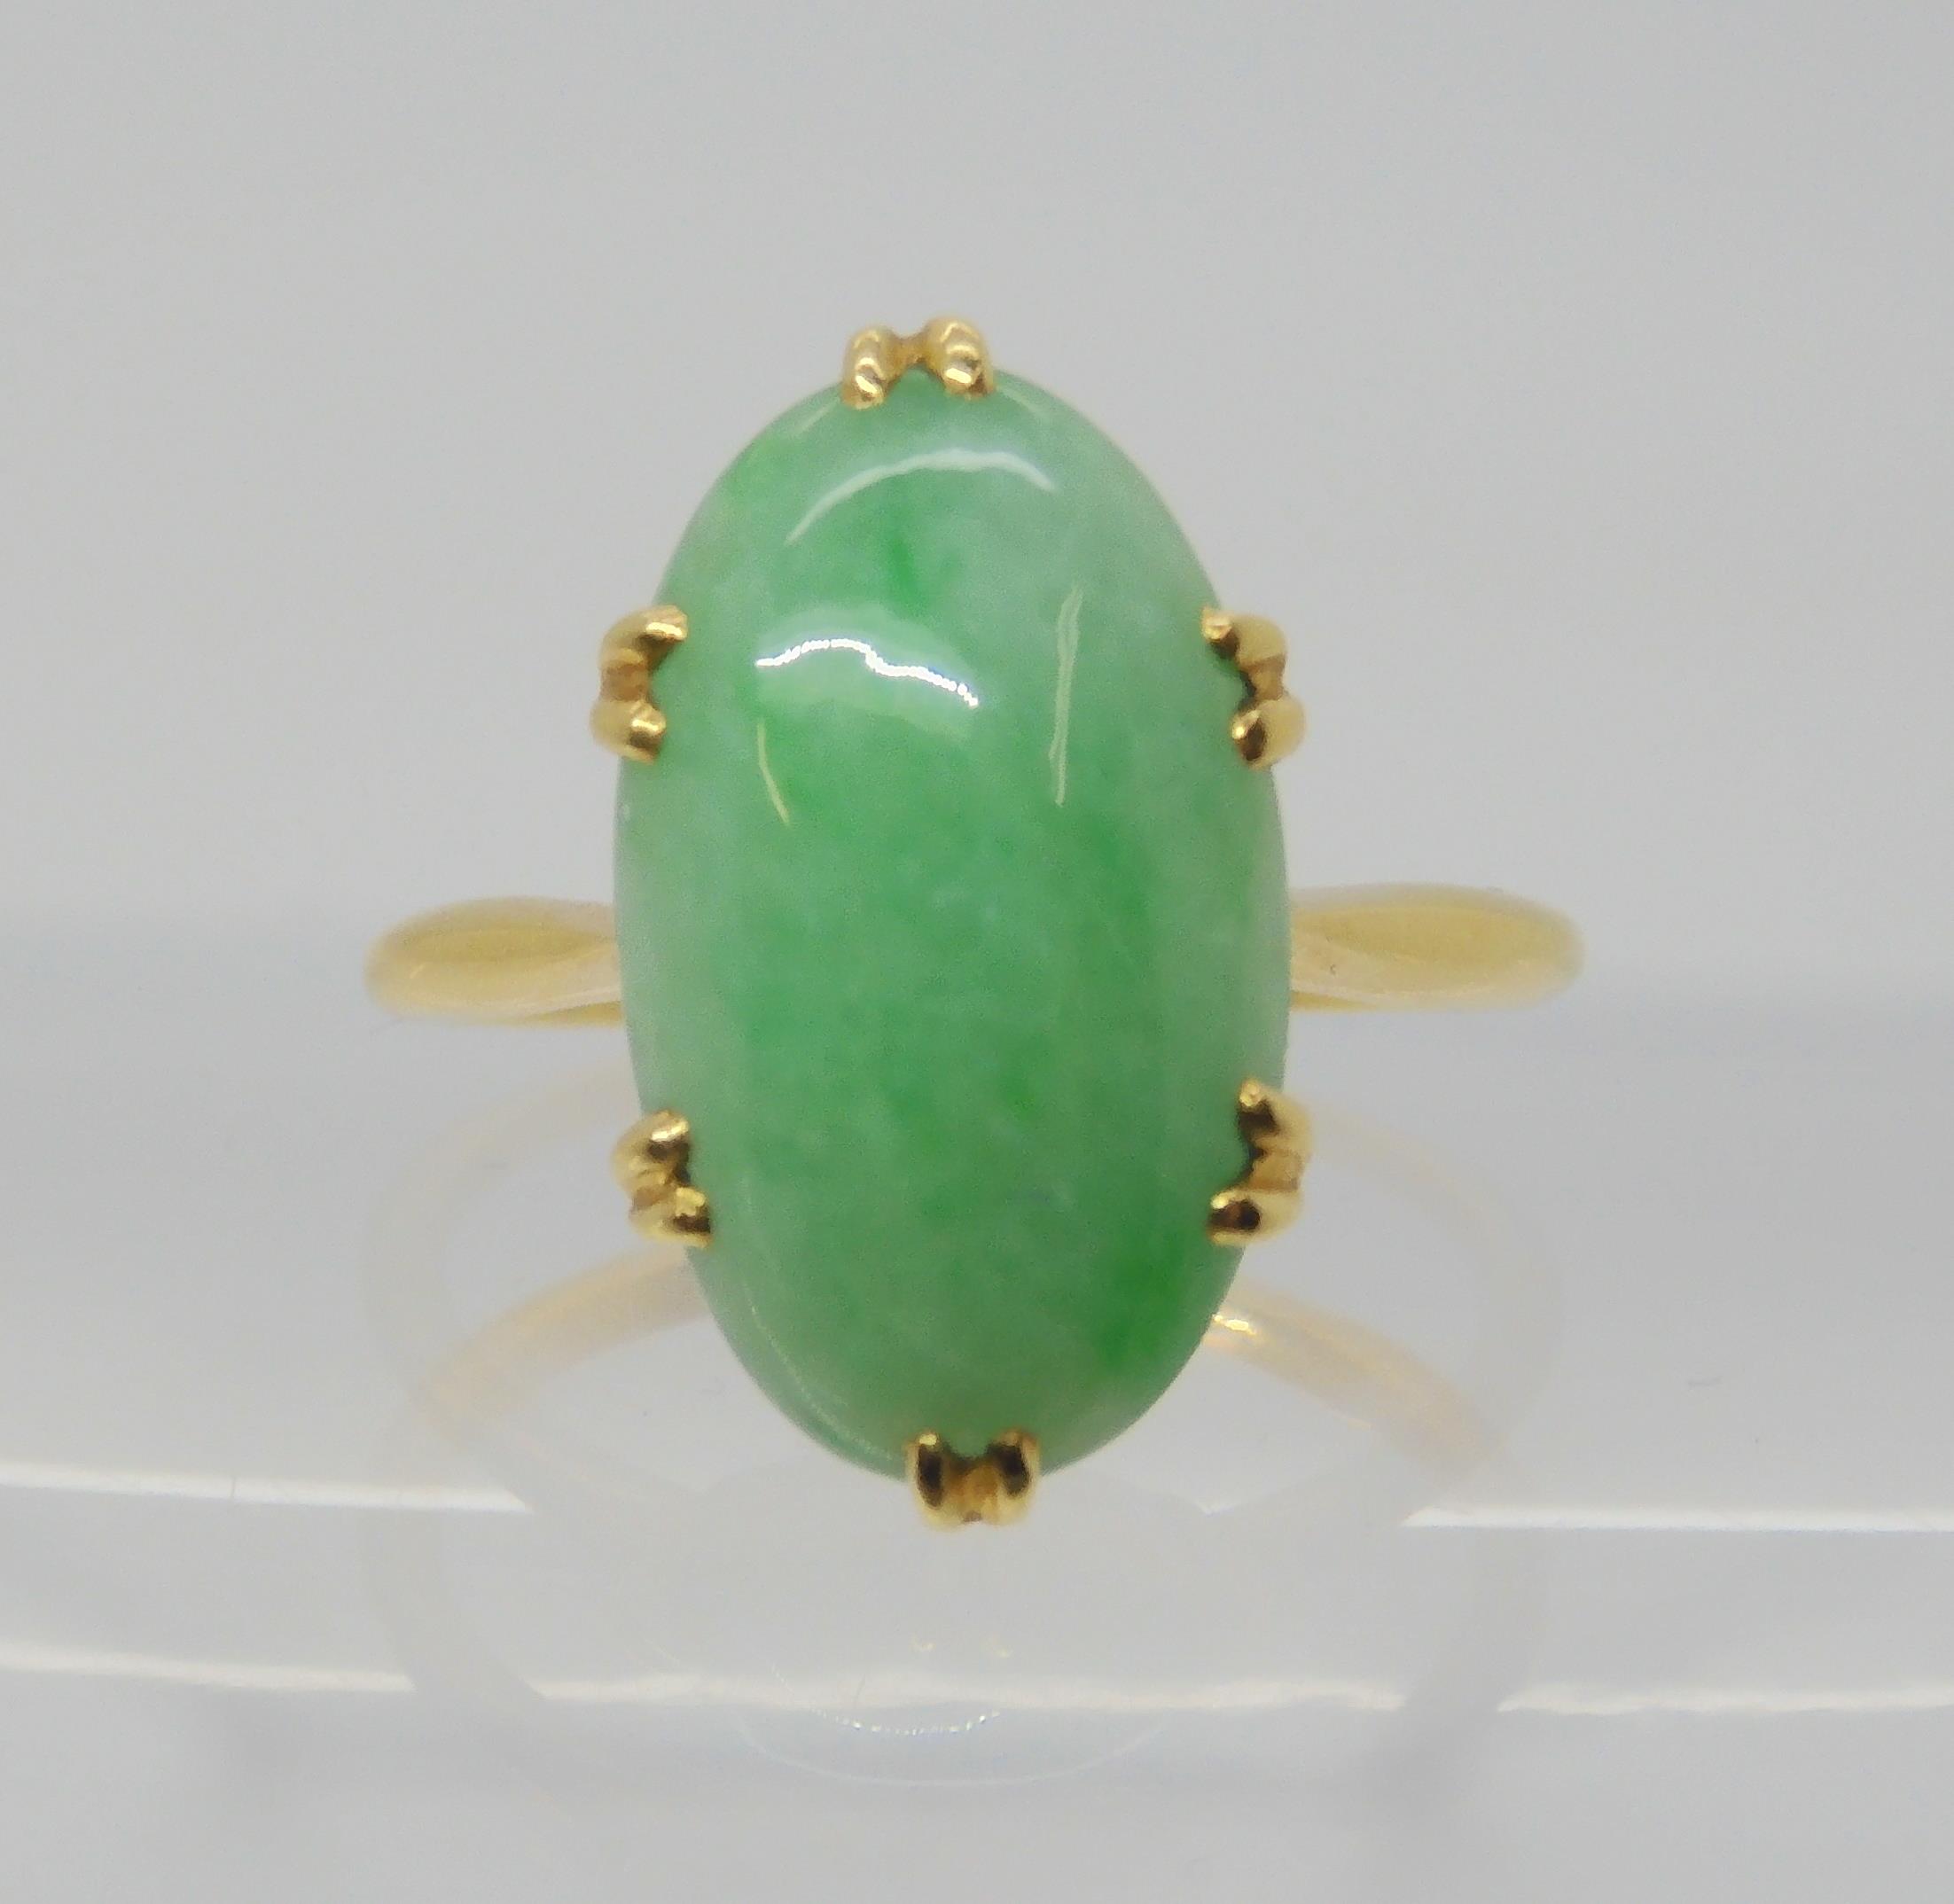 A CHINESE GREEN HARDSTONE RING mounted in bright yellow metal, the hardstone measures approx 16mm - Image 2 of 4